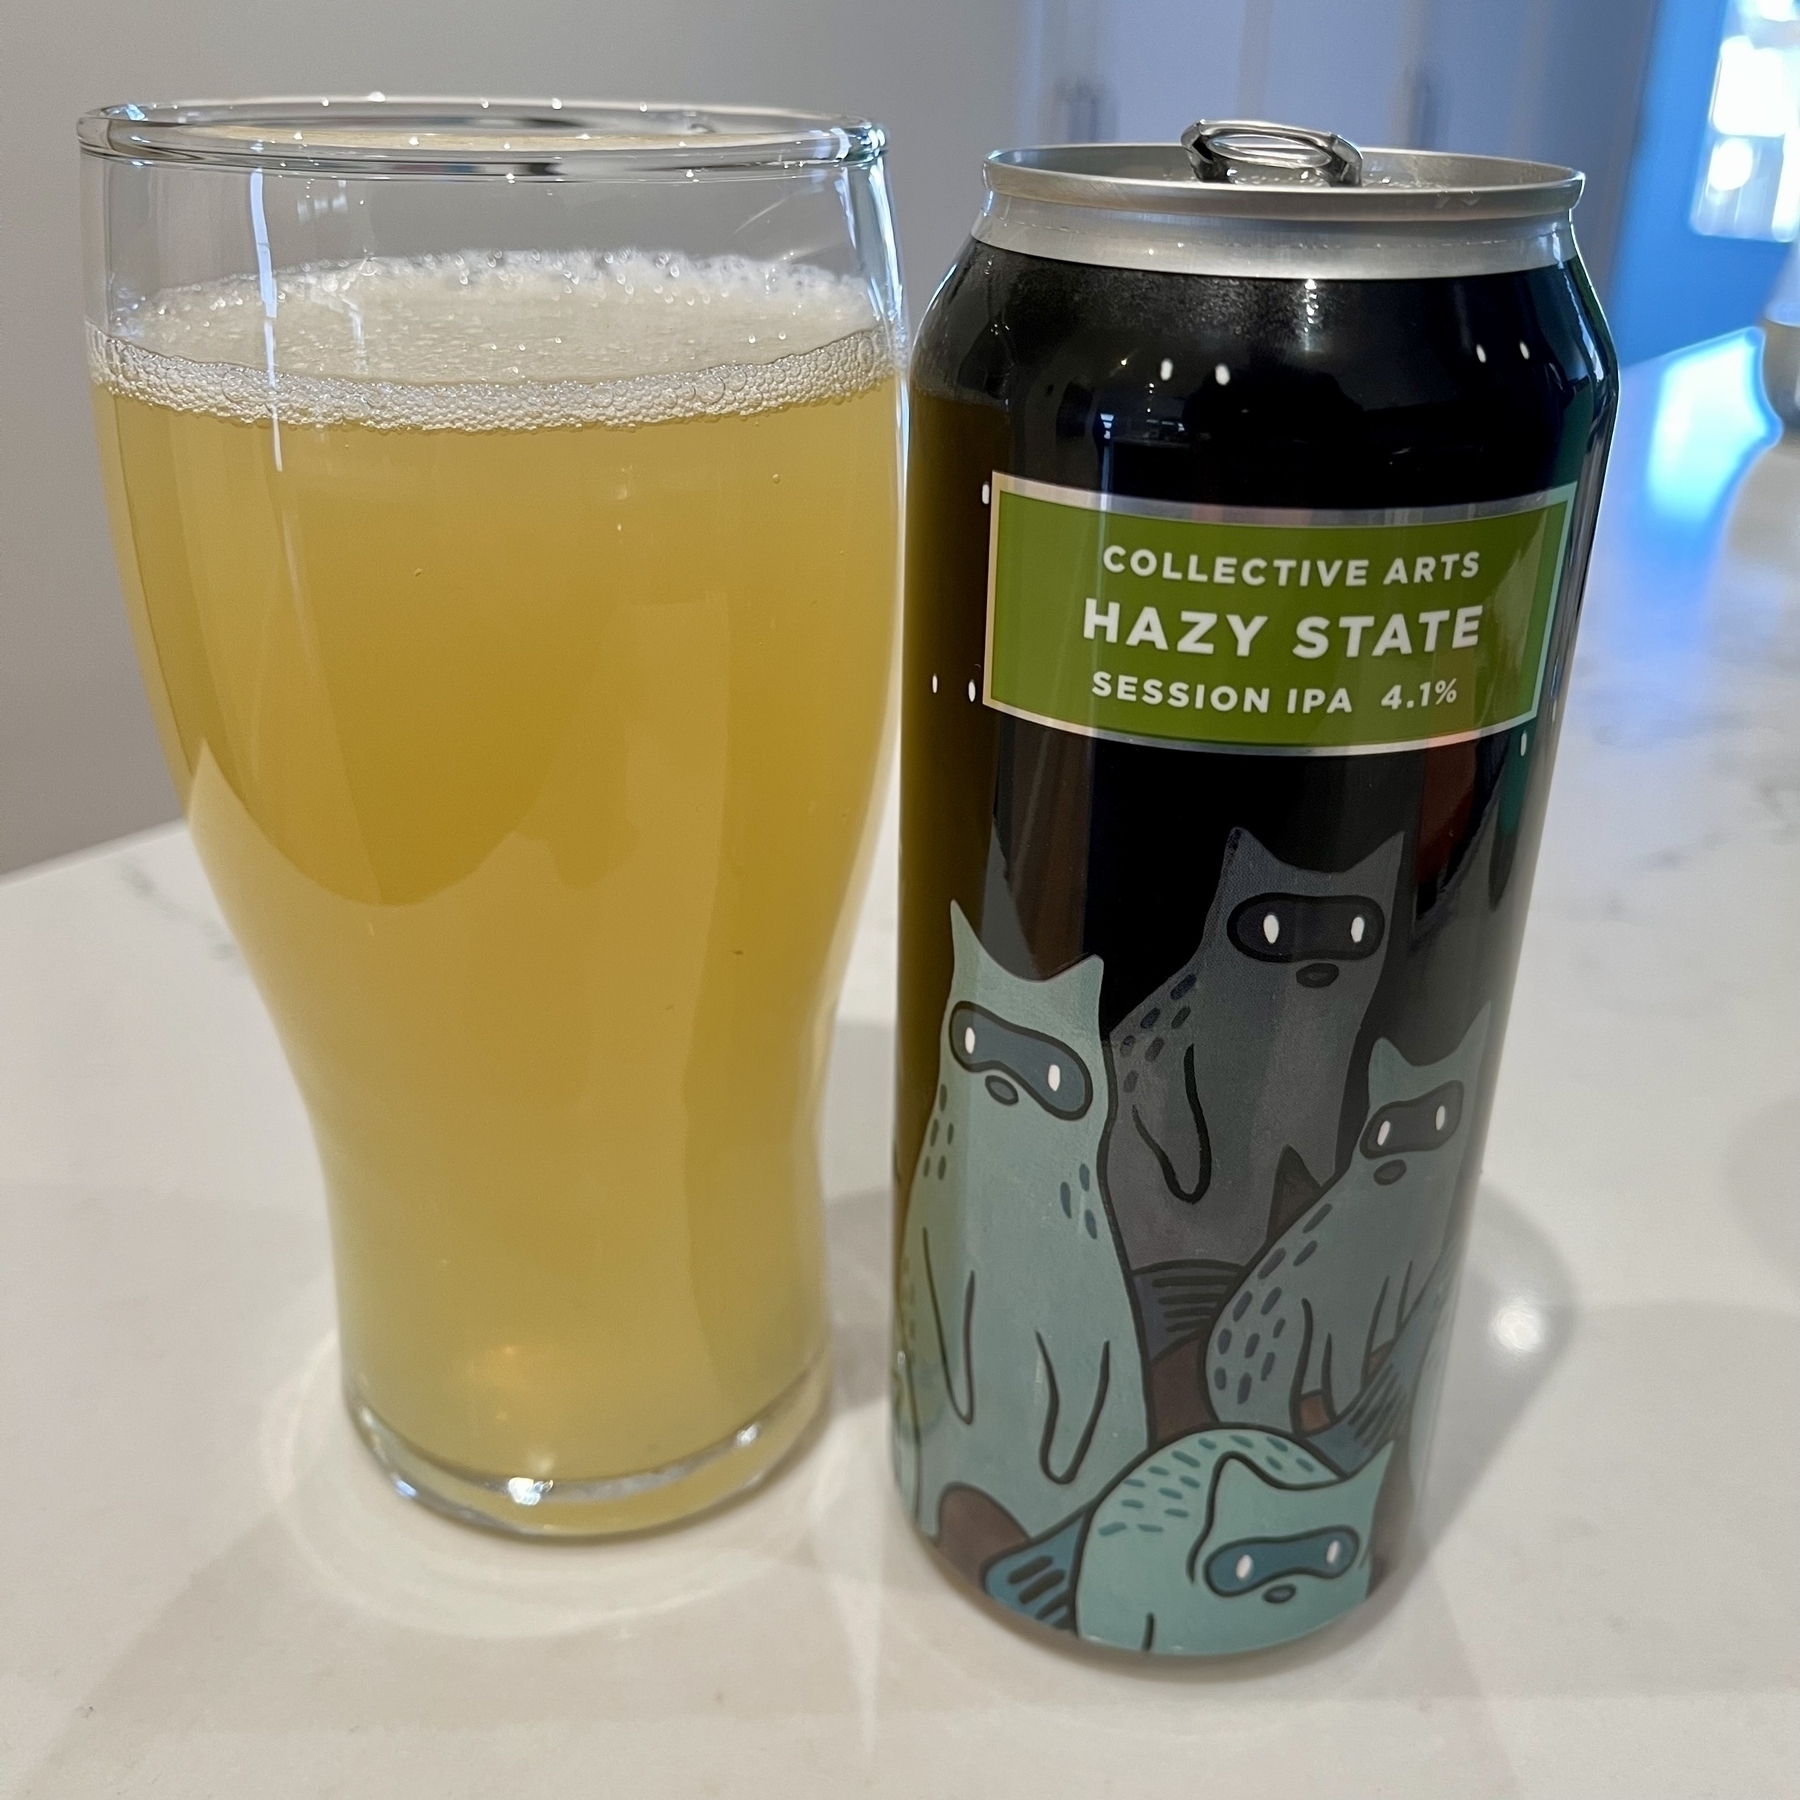 A hazy yellow beverage is poured into a glass next to a can labeled "COLLECTIVE ARTS HAZY STATE SESSION IPA 4.1%" with stylized cat illustrations on a kitchen counter.